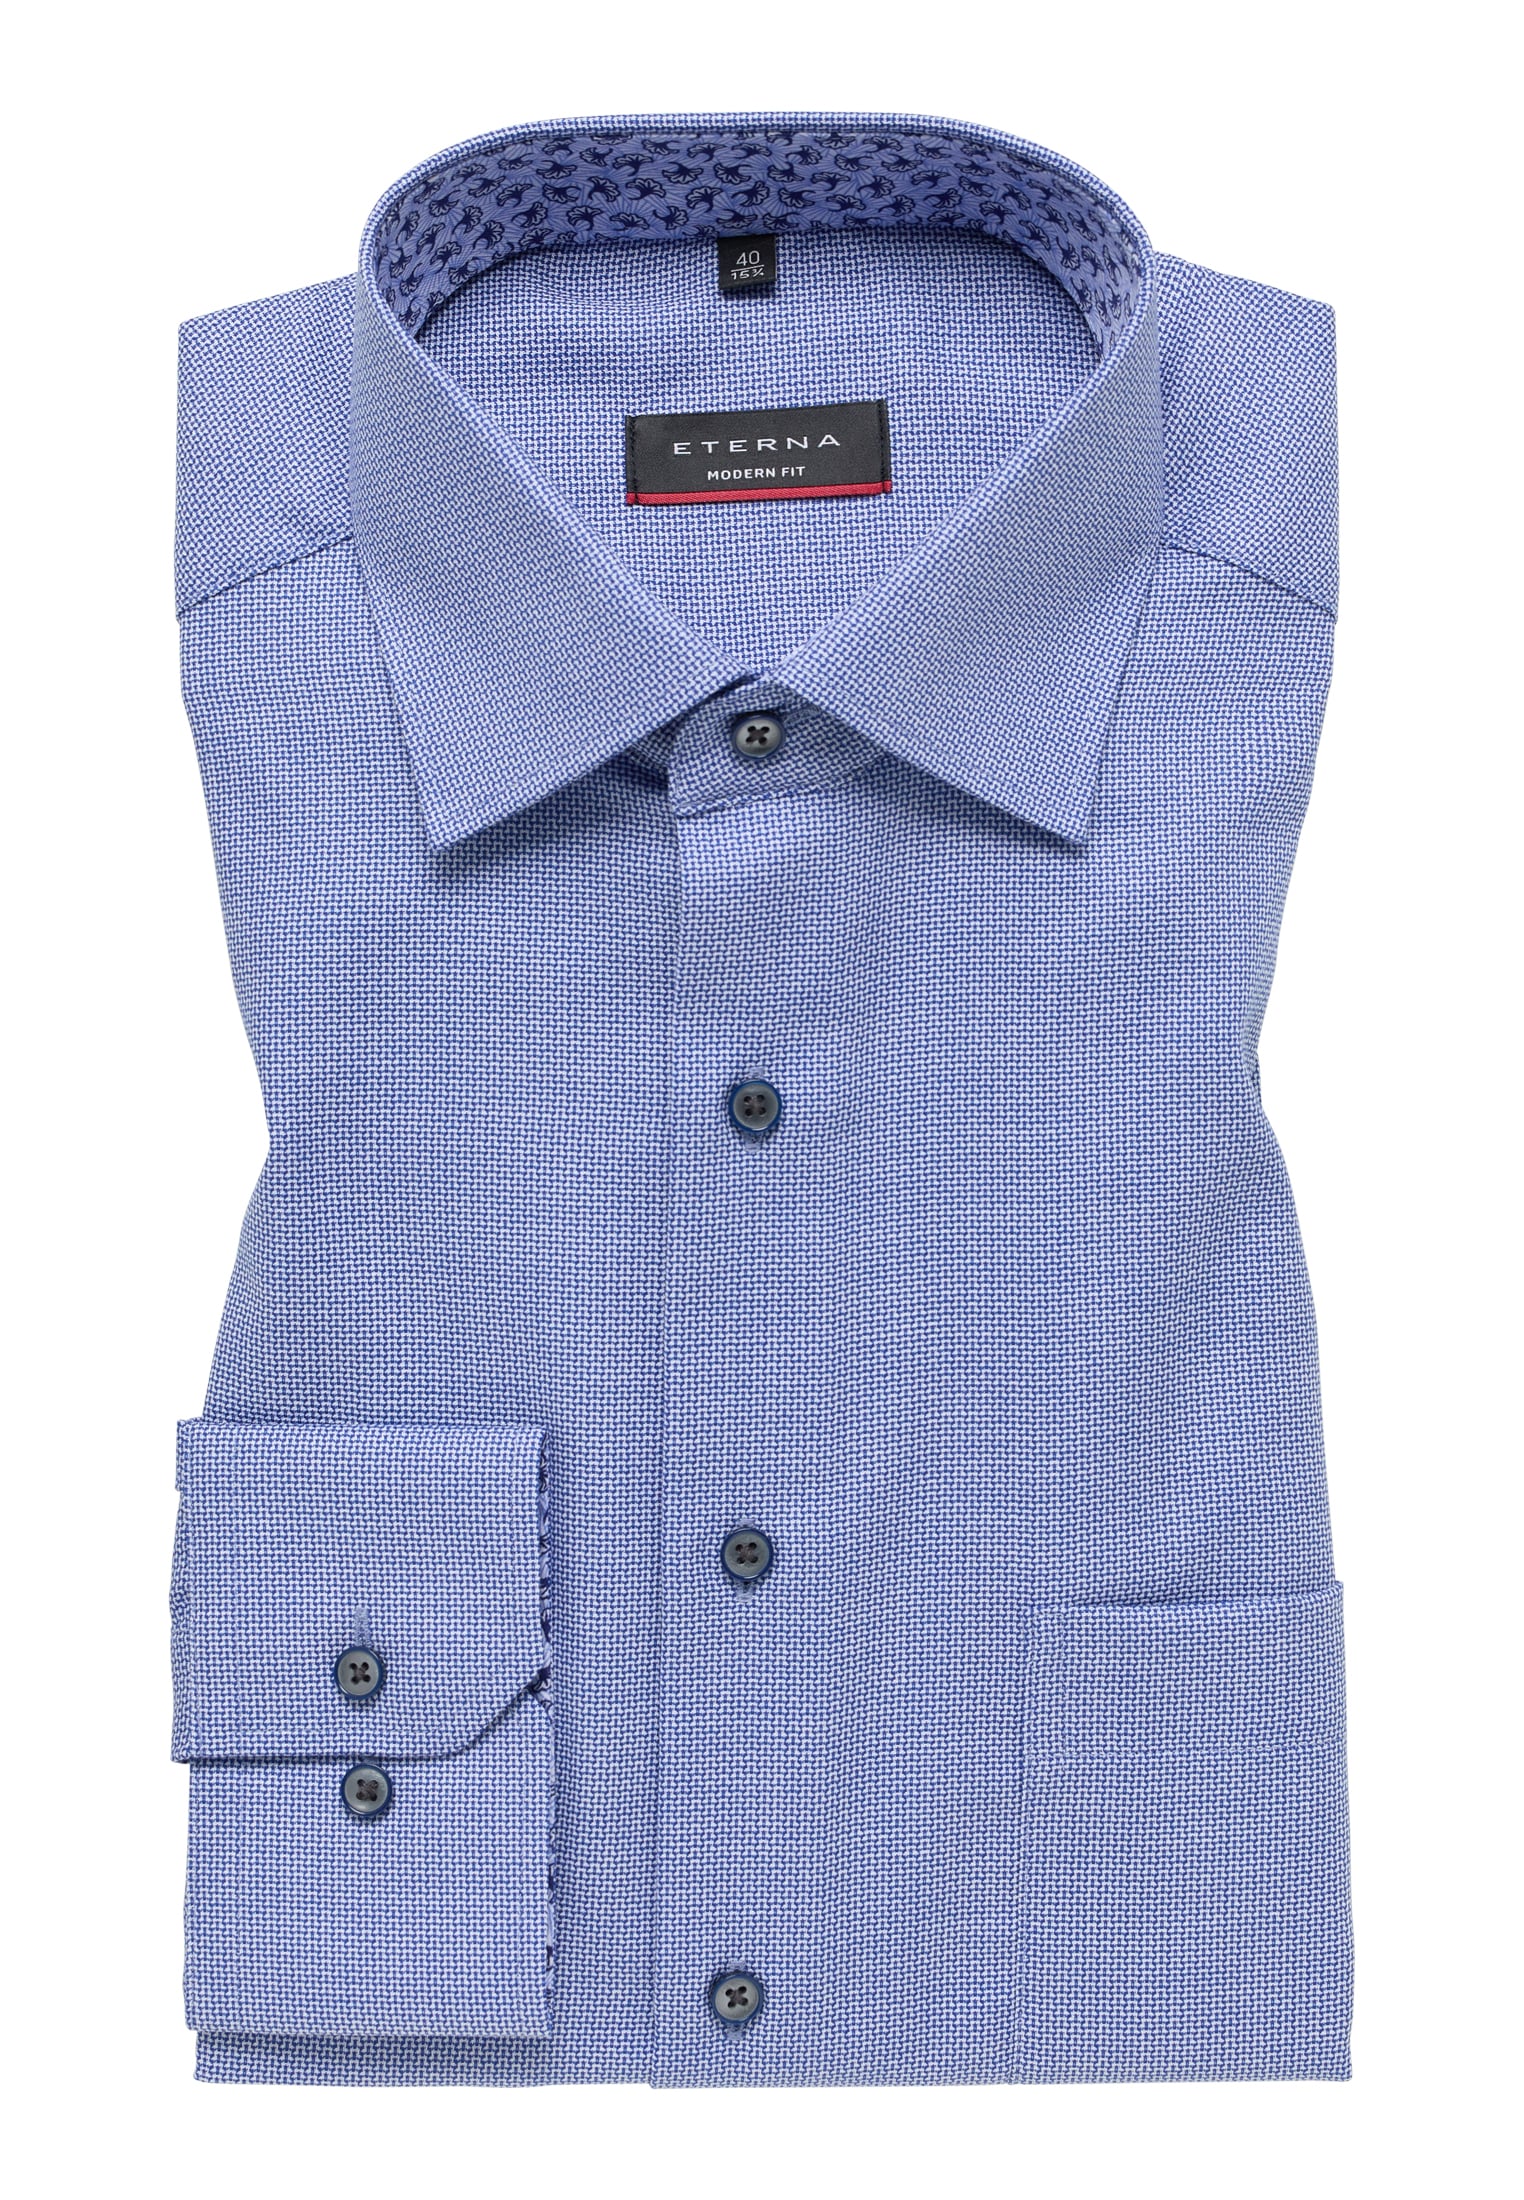 MODERN FIT Shirt | royal | | | sleeve in 1SH11802-01-51-43-1/1 long blue 43 structured royal blue